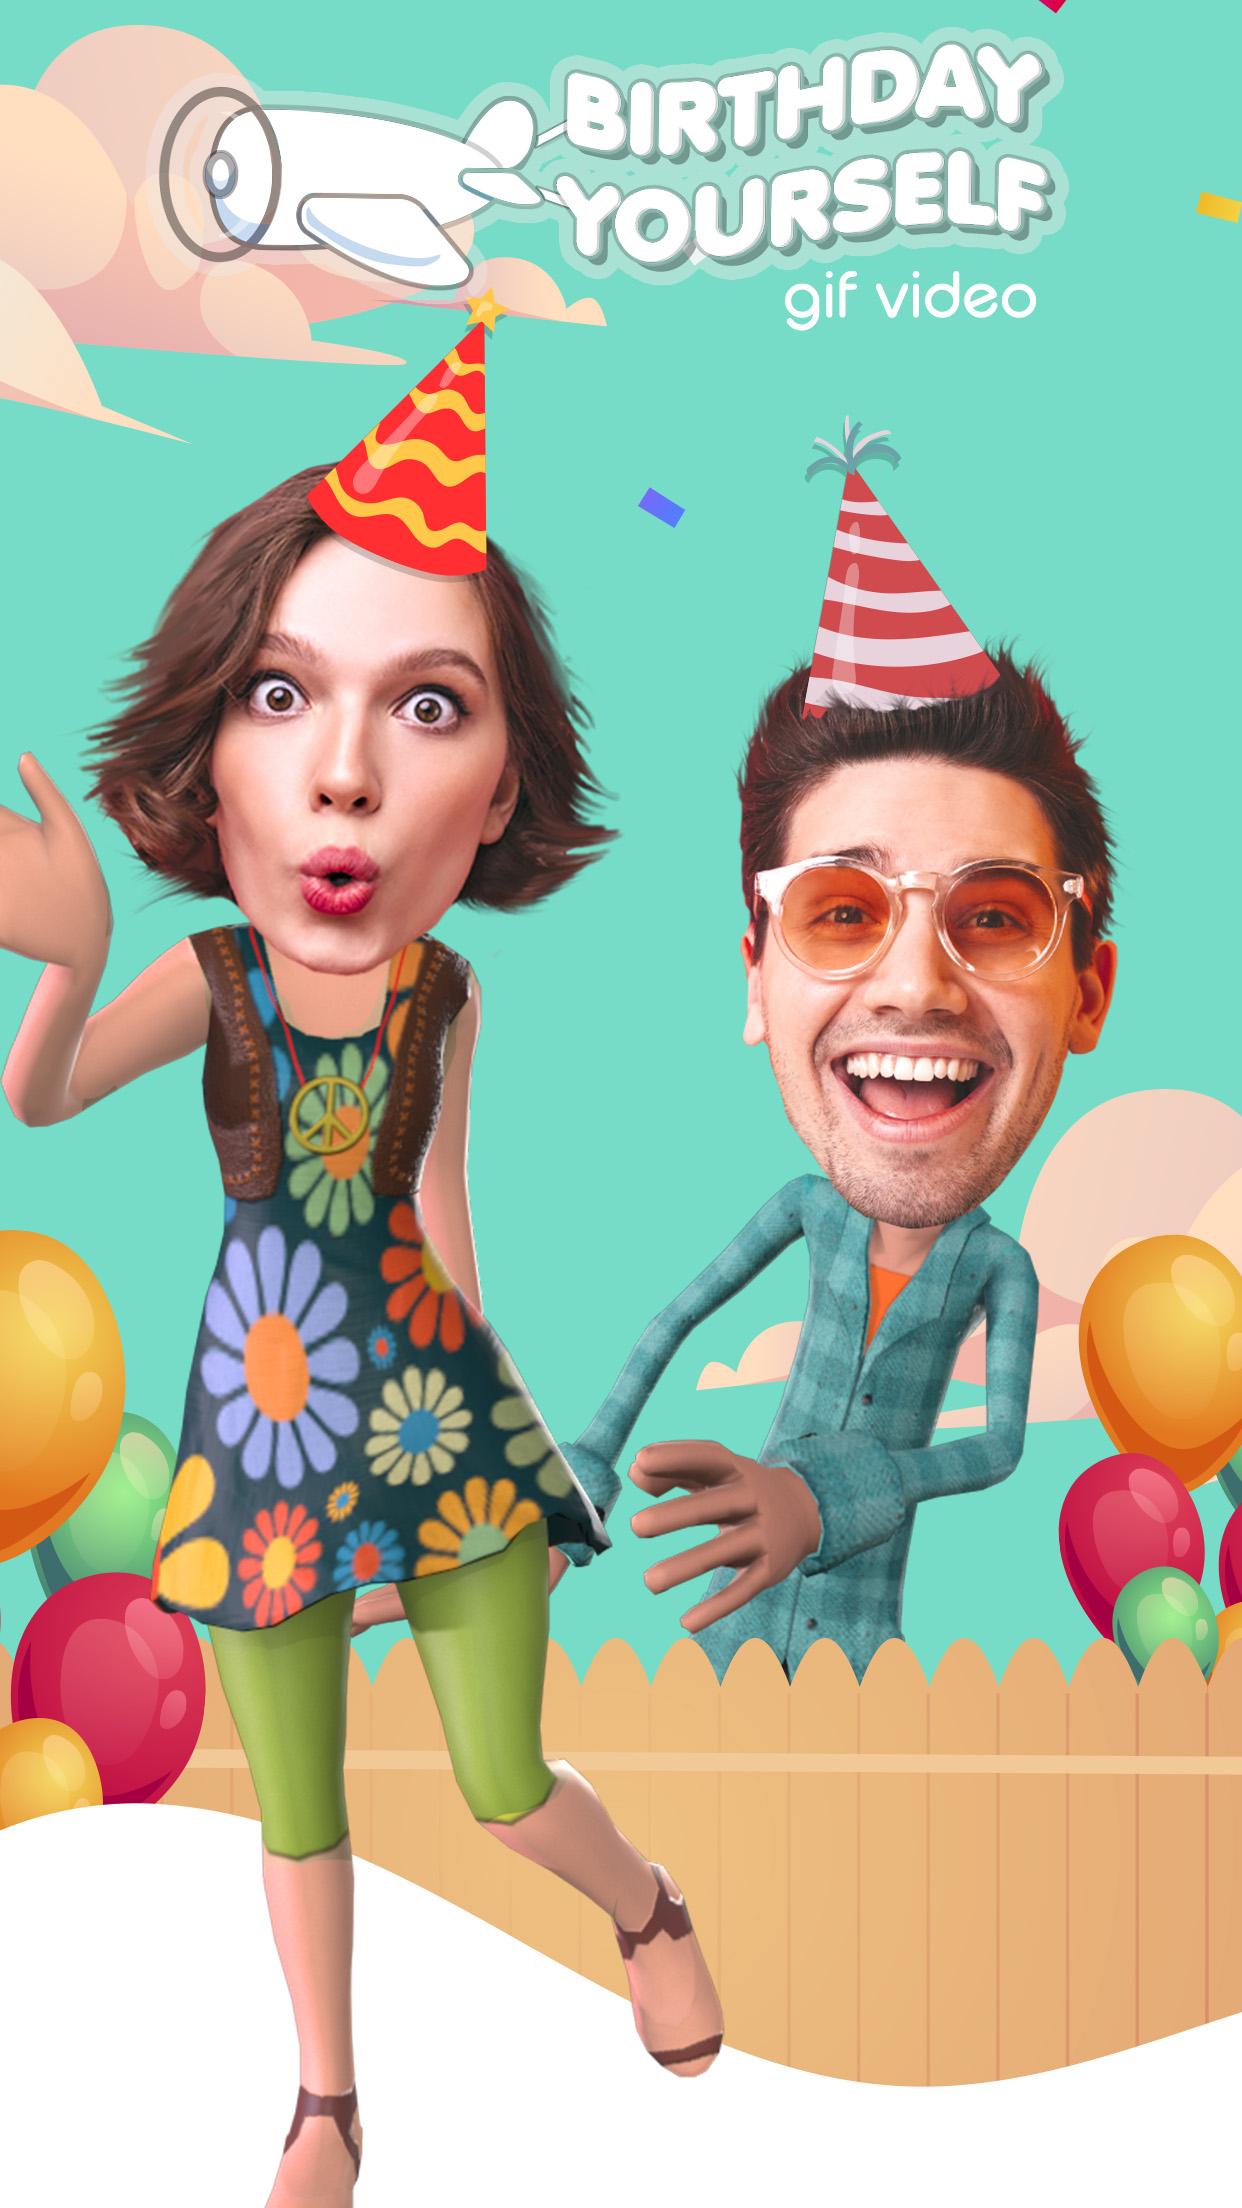 Birthday Yourself - put your face in 3D Gif vide 4 Screenshot 6